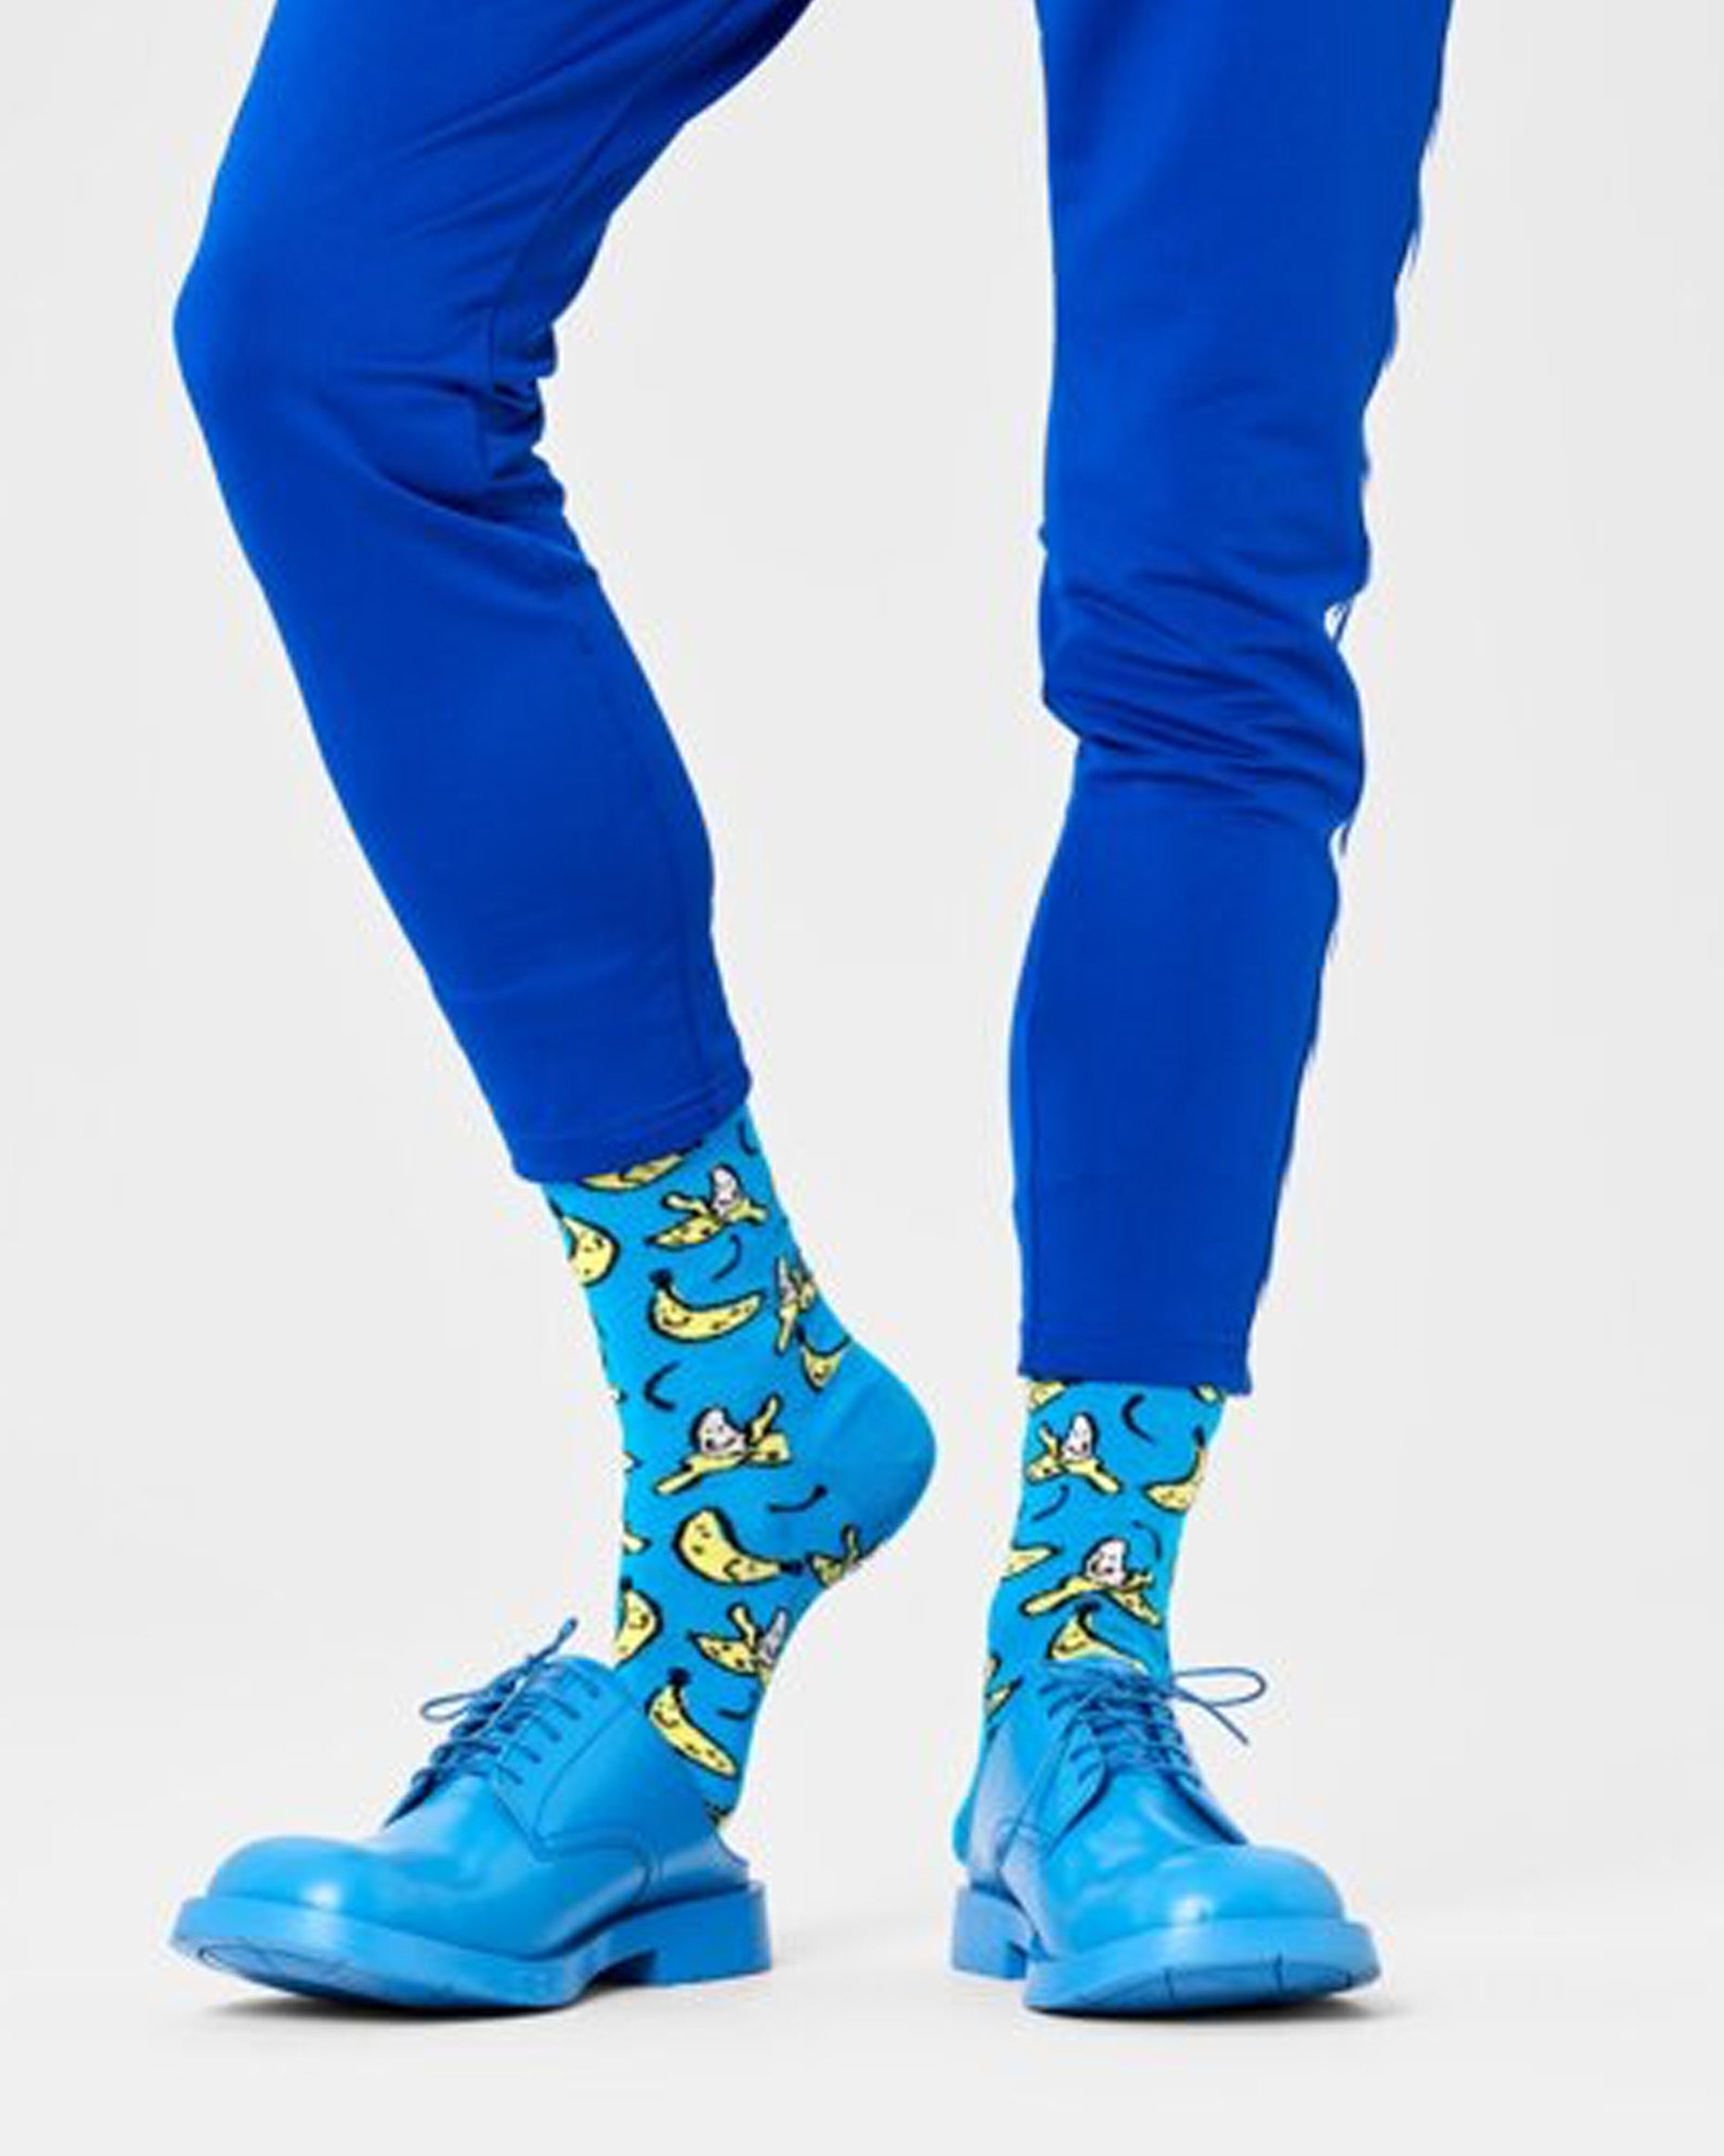 Happy Socks P000720 Banana Sock - Blue cotton crew length ankle socks with an all over pattern of smiling cartoon bananas in yellow, cream and black, worn with blue brogues and blue pants.